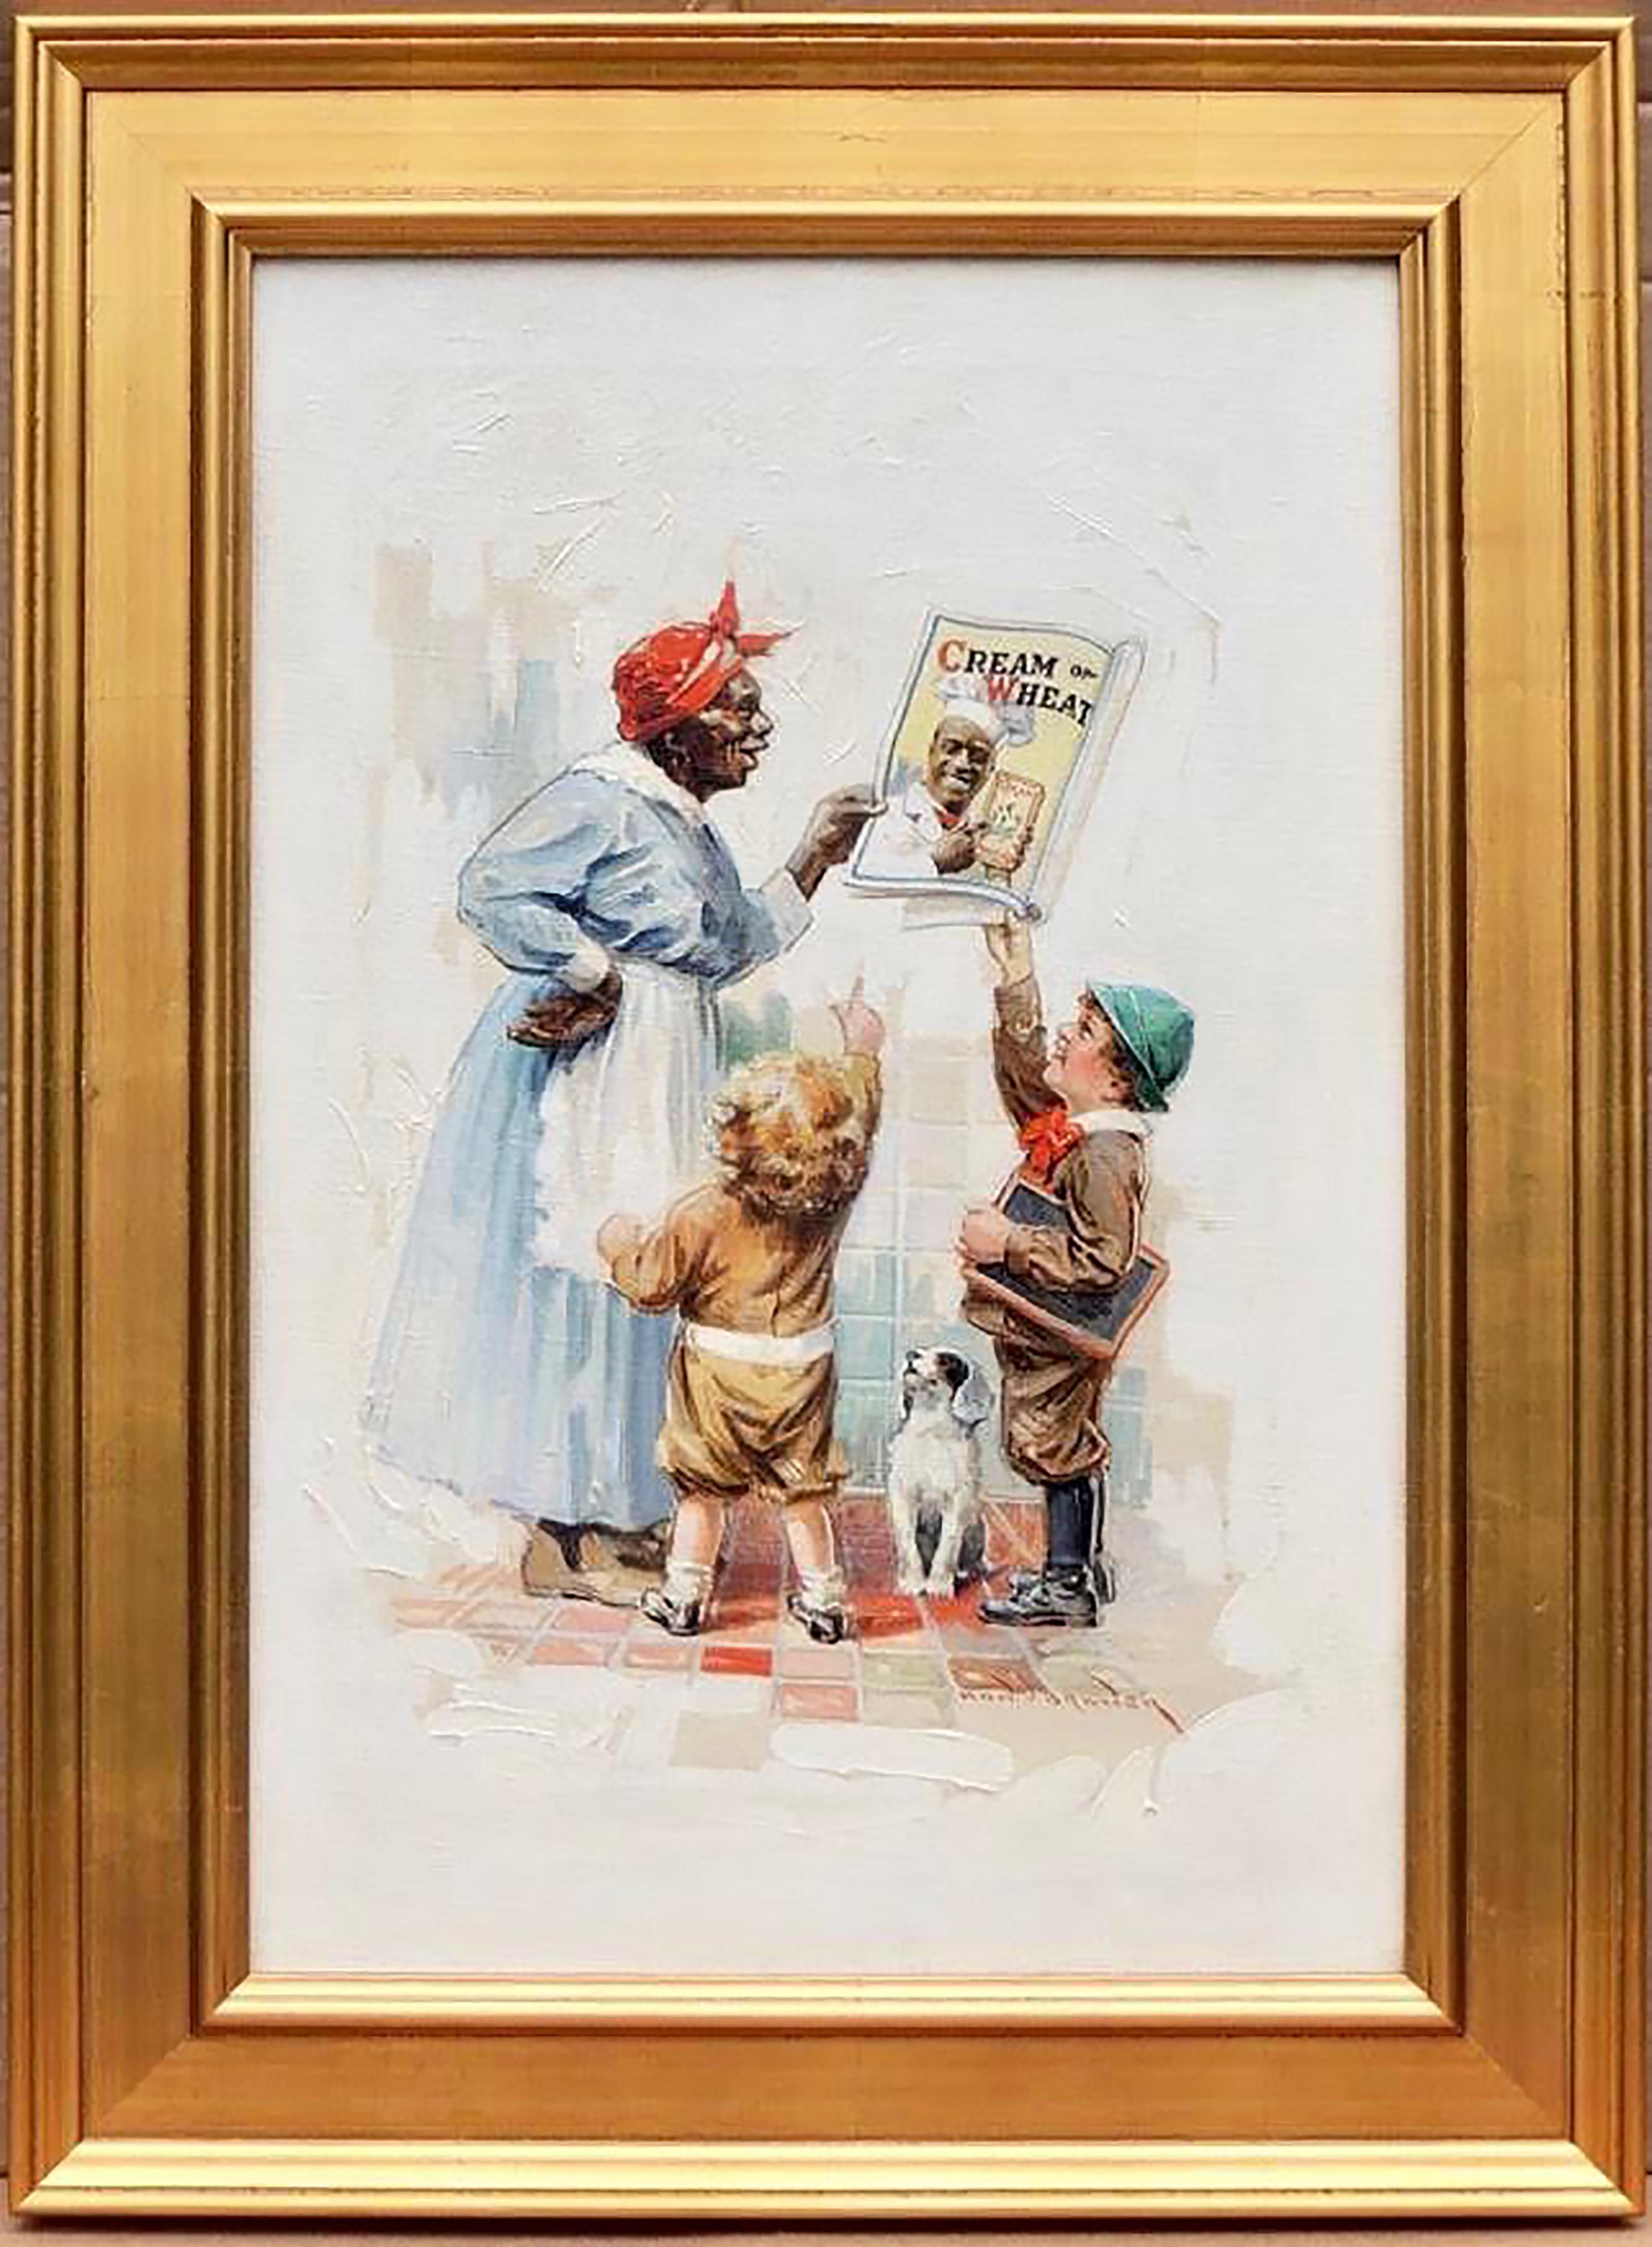 Cream of Wheat Advertisement, Saturday Evening Post, May 5, 1920 - Painting by Edward Brewer